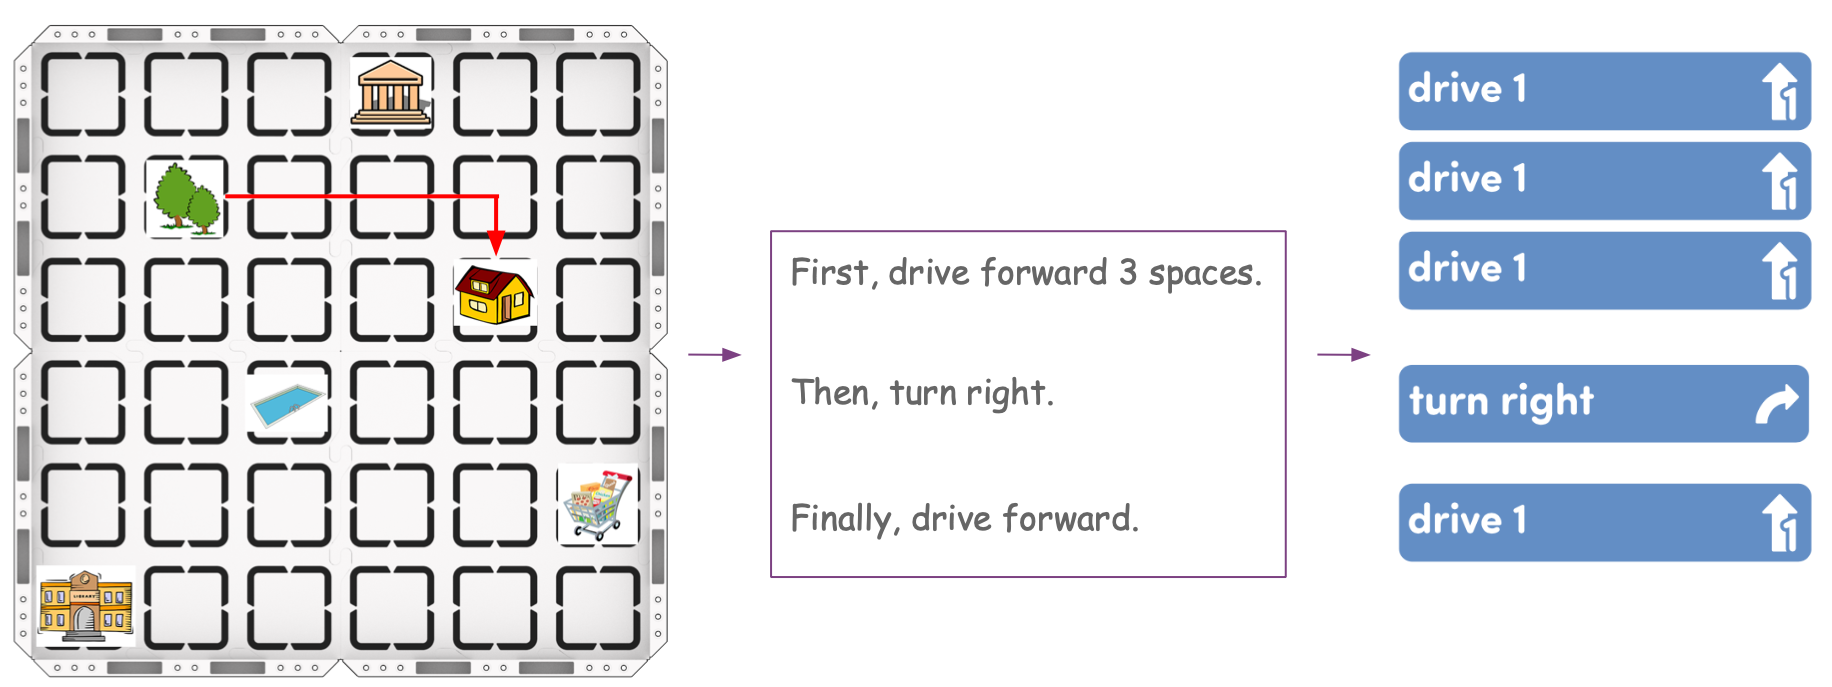 image of steps for project planning, first identify start and finish on the map, then identify what the 123 Robot will need to do: move forward 3 spaces, turn right, then move forward 1 more space.  then identify the coder cards needed to do this: "Drive 1",  "Drive 1",  "Drive 1", "Turn right",  "Drive 1",